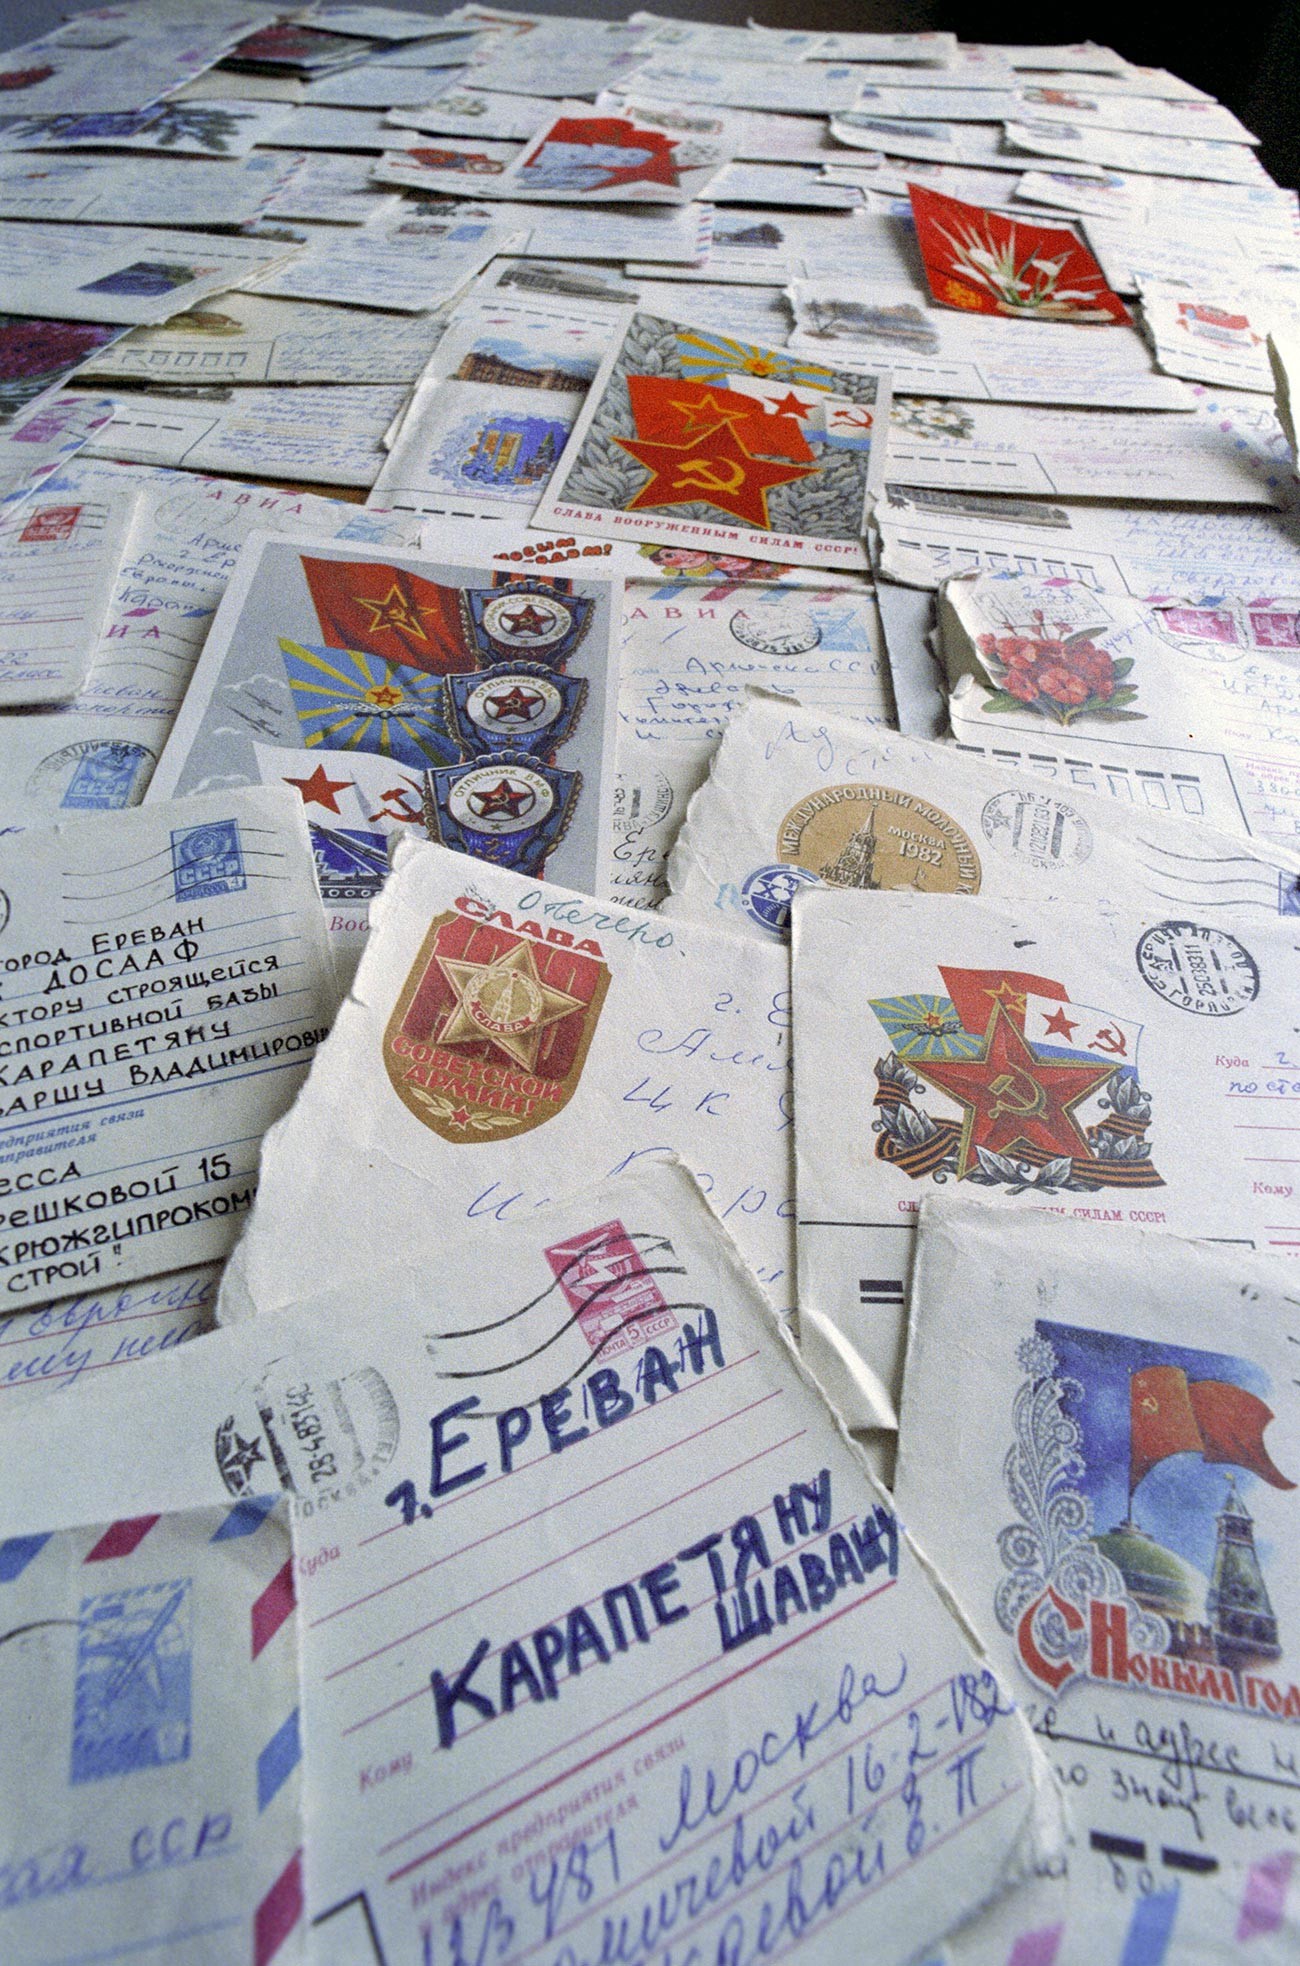 Letters from grateful people came to Shavarsh Karapetyan from all over the Soviet Union